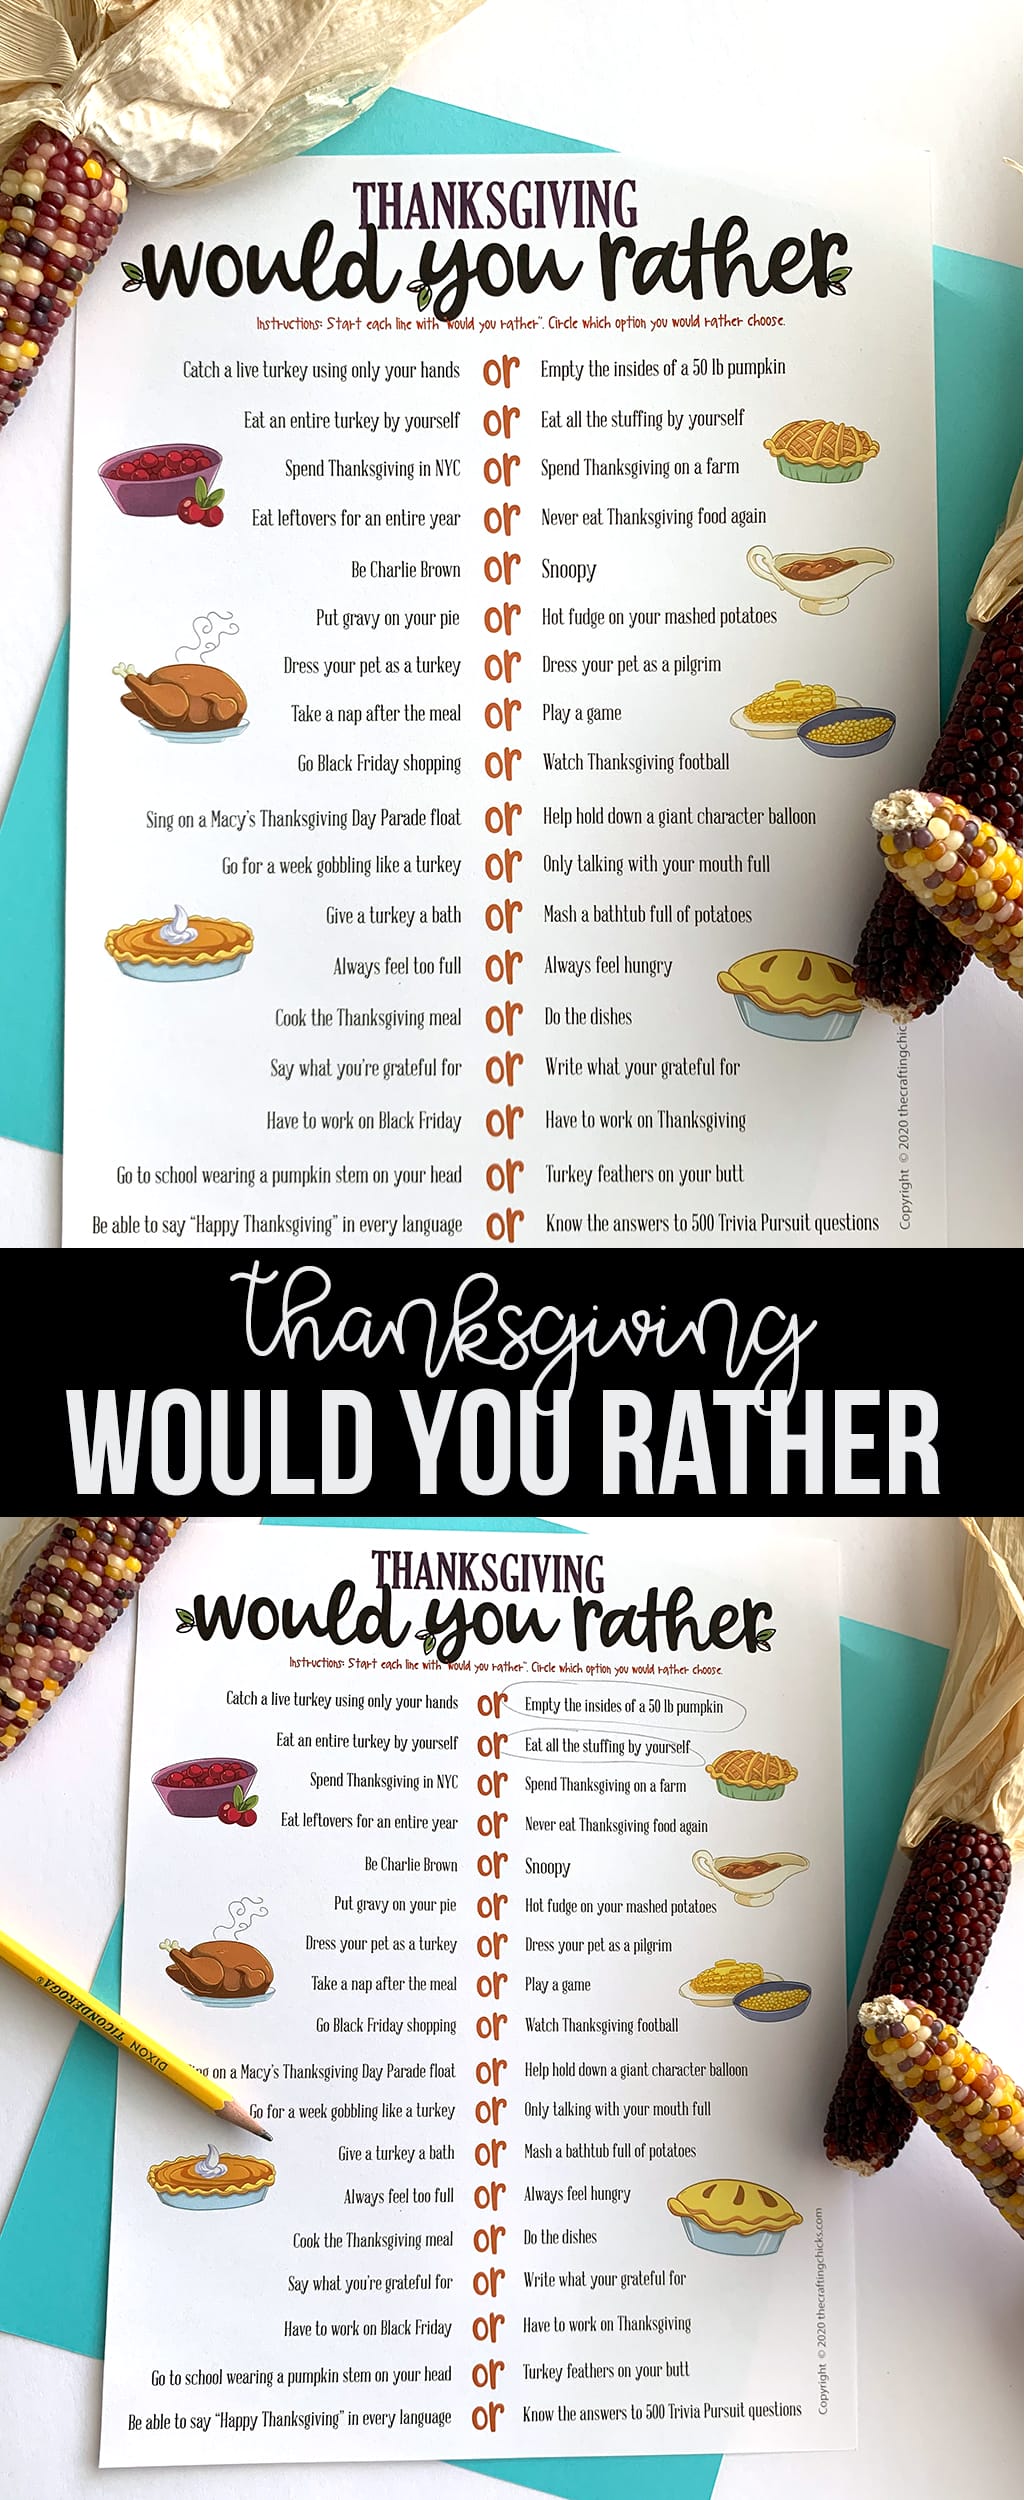 Need a fun game to play around your Thanksgiving table? Our Thanksgiving Would You Rather Free Printable Game will have everyone laughing. #thanksgiving #thanksgivinggame #thanksgivingprintable